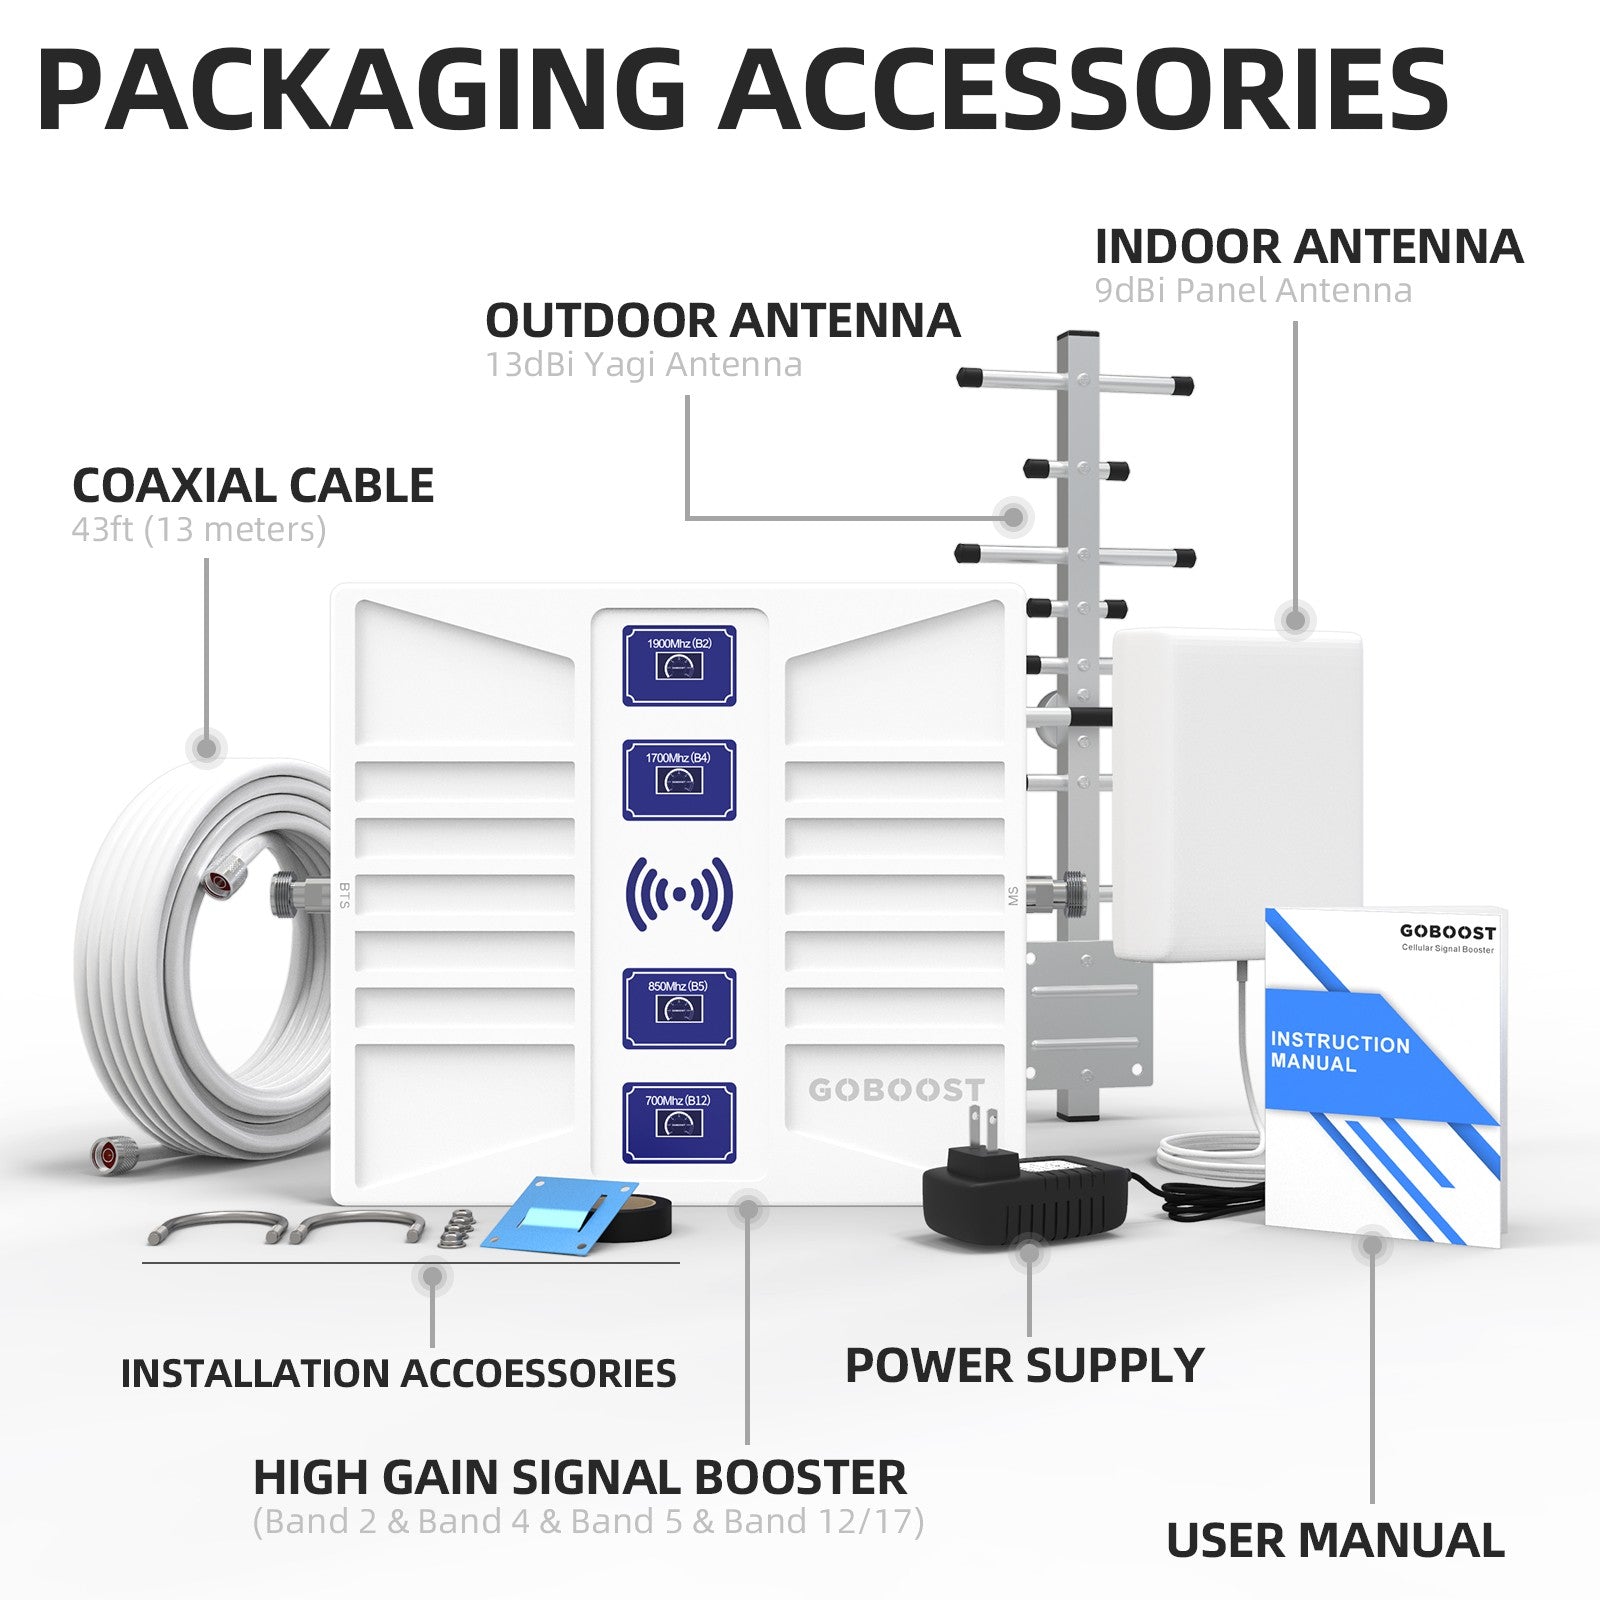 GOBOOST Four Band Signal Booster Yagi Packaging Accessories